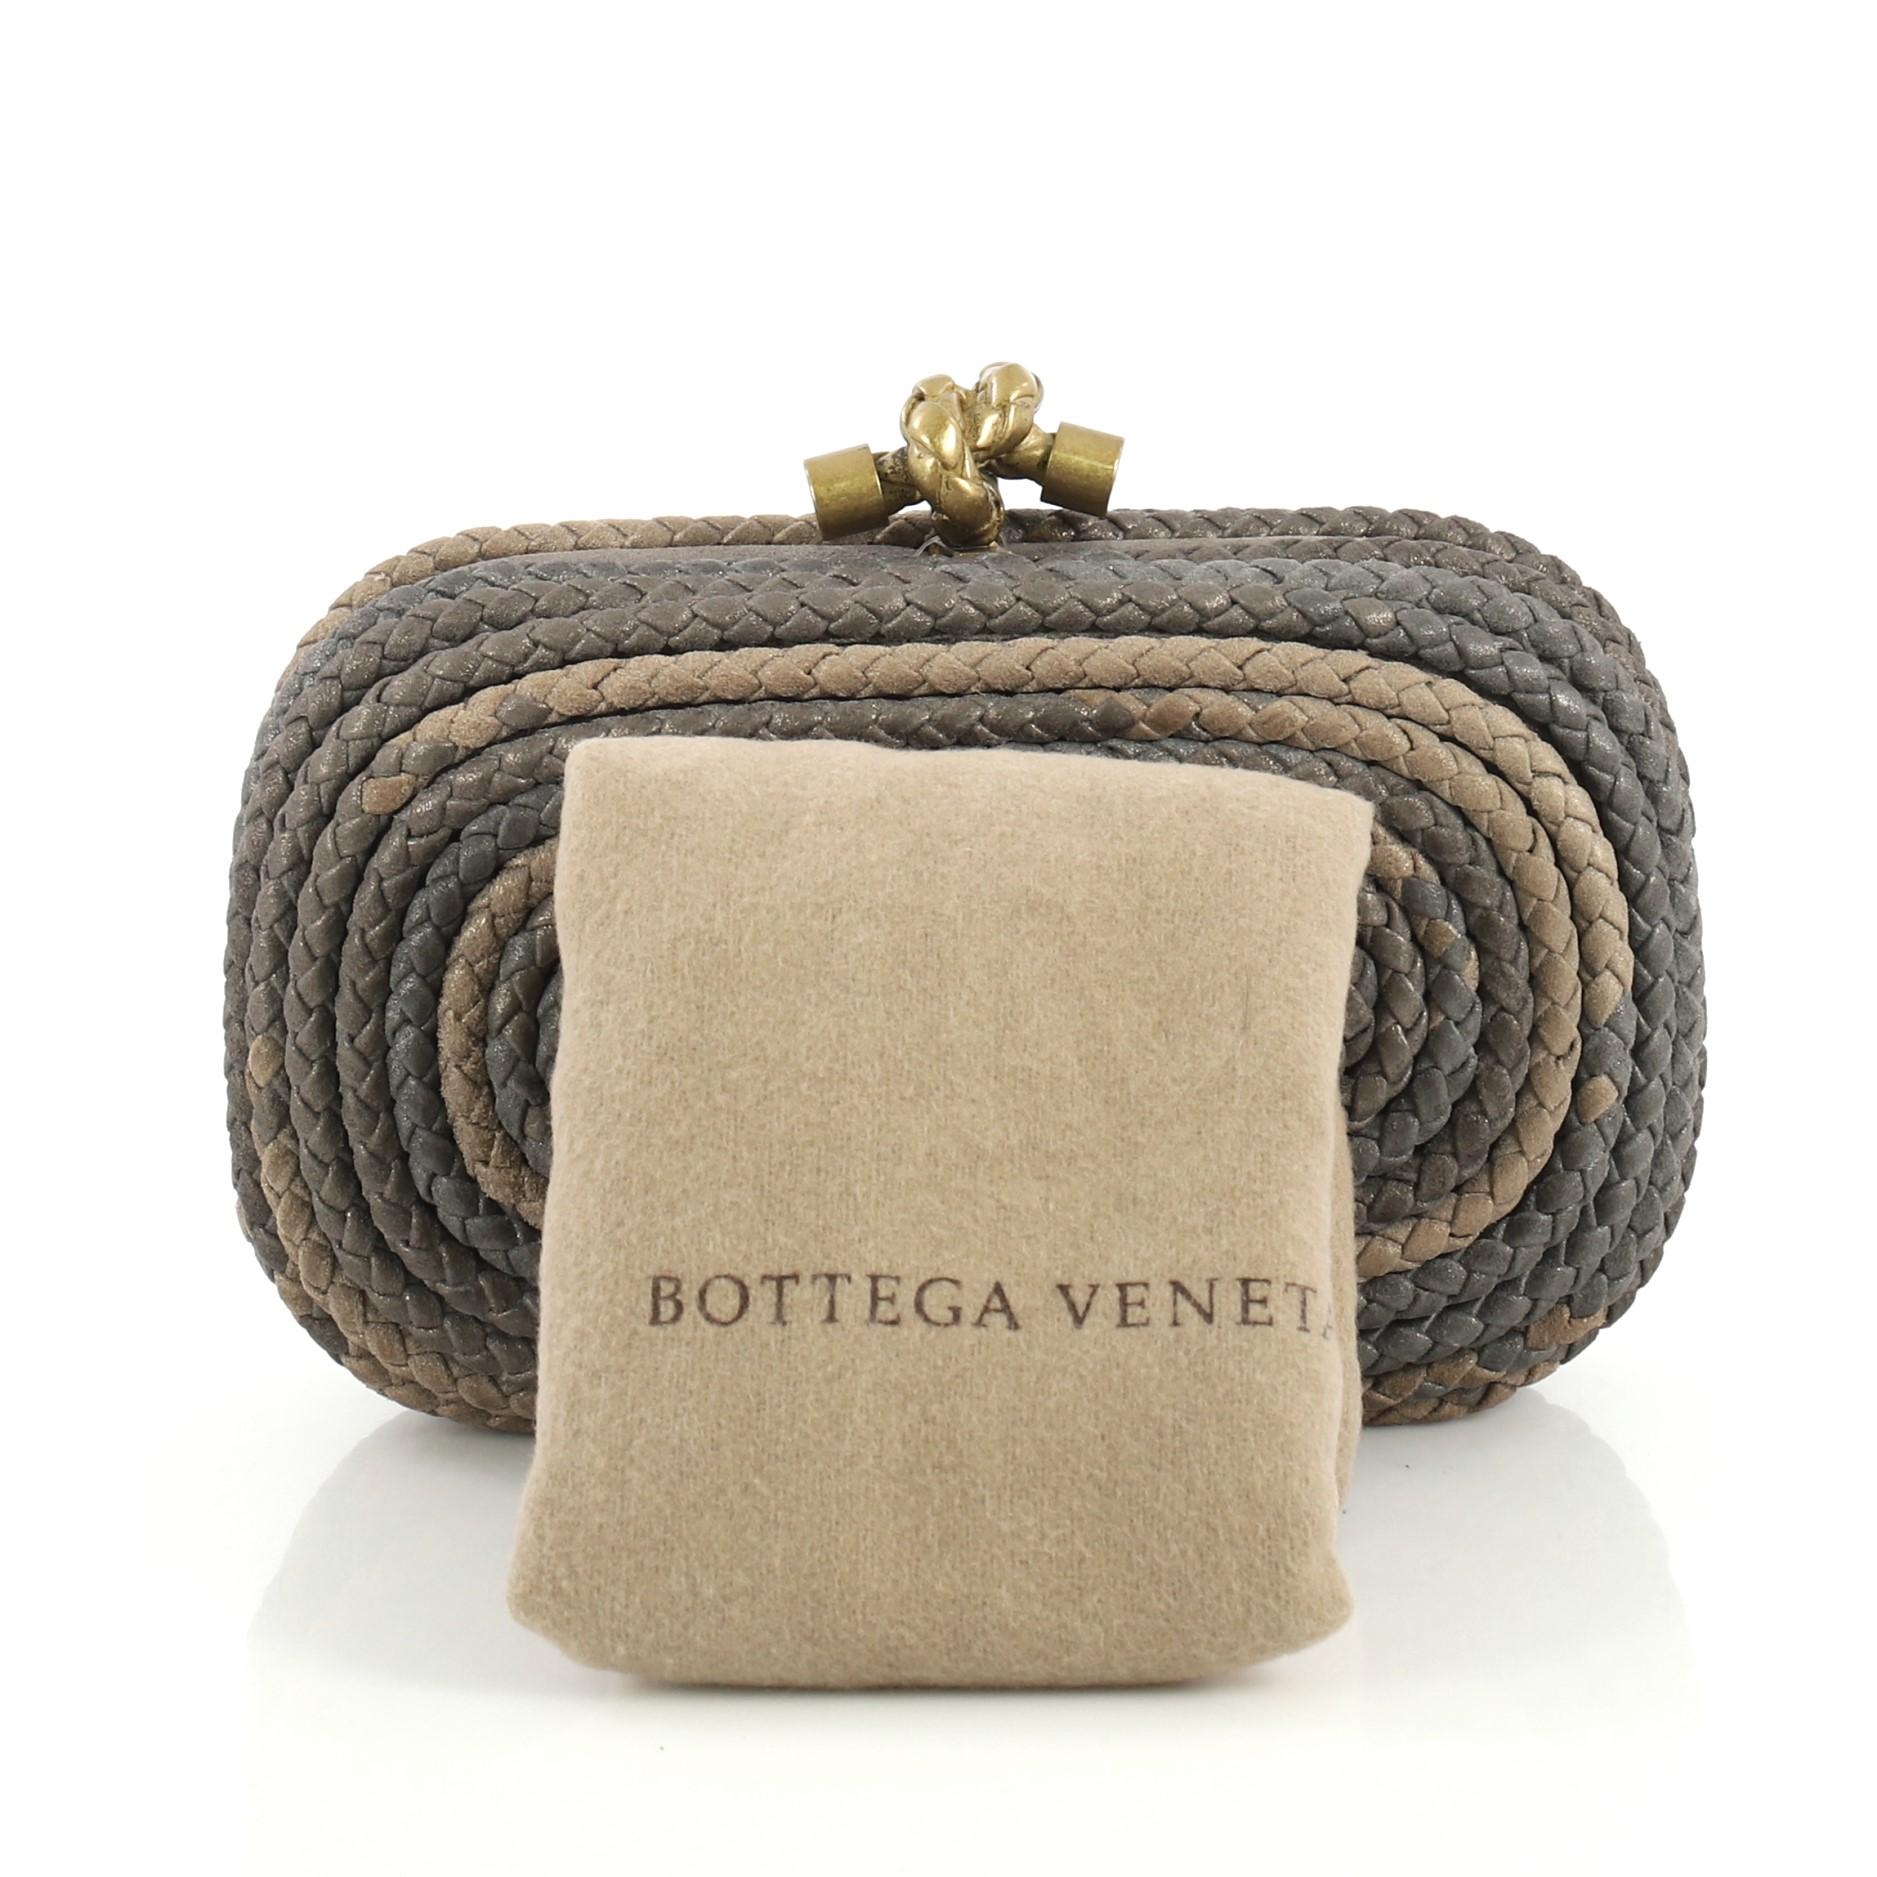 This Bottega Veneta Knot Clutch Braided Leather Small, crafted in metallic neutral braided leather, features aged gold-tone hardware. Its knot clasp closure opens to a metallic neutral suede interior.

Estimated Retail Price: $1,150
Condition: